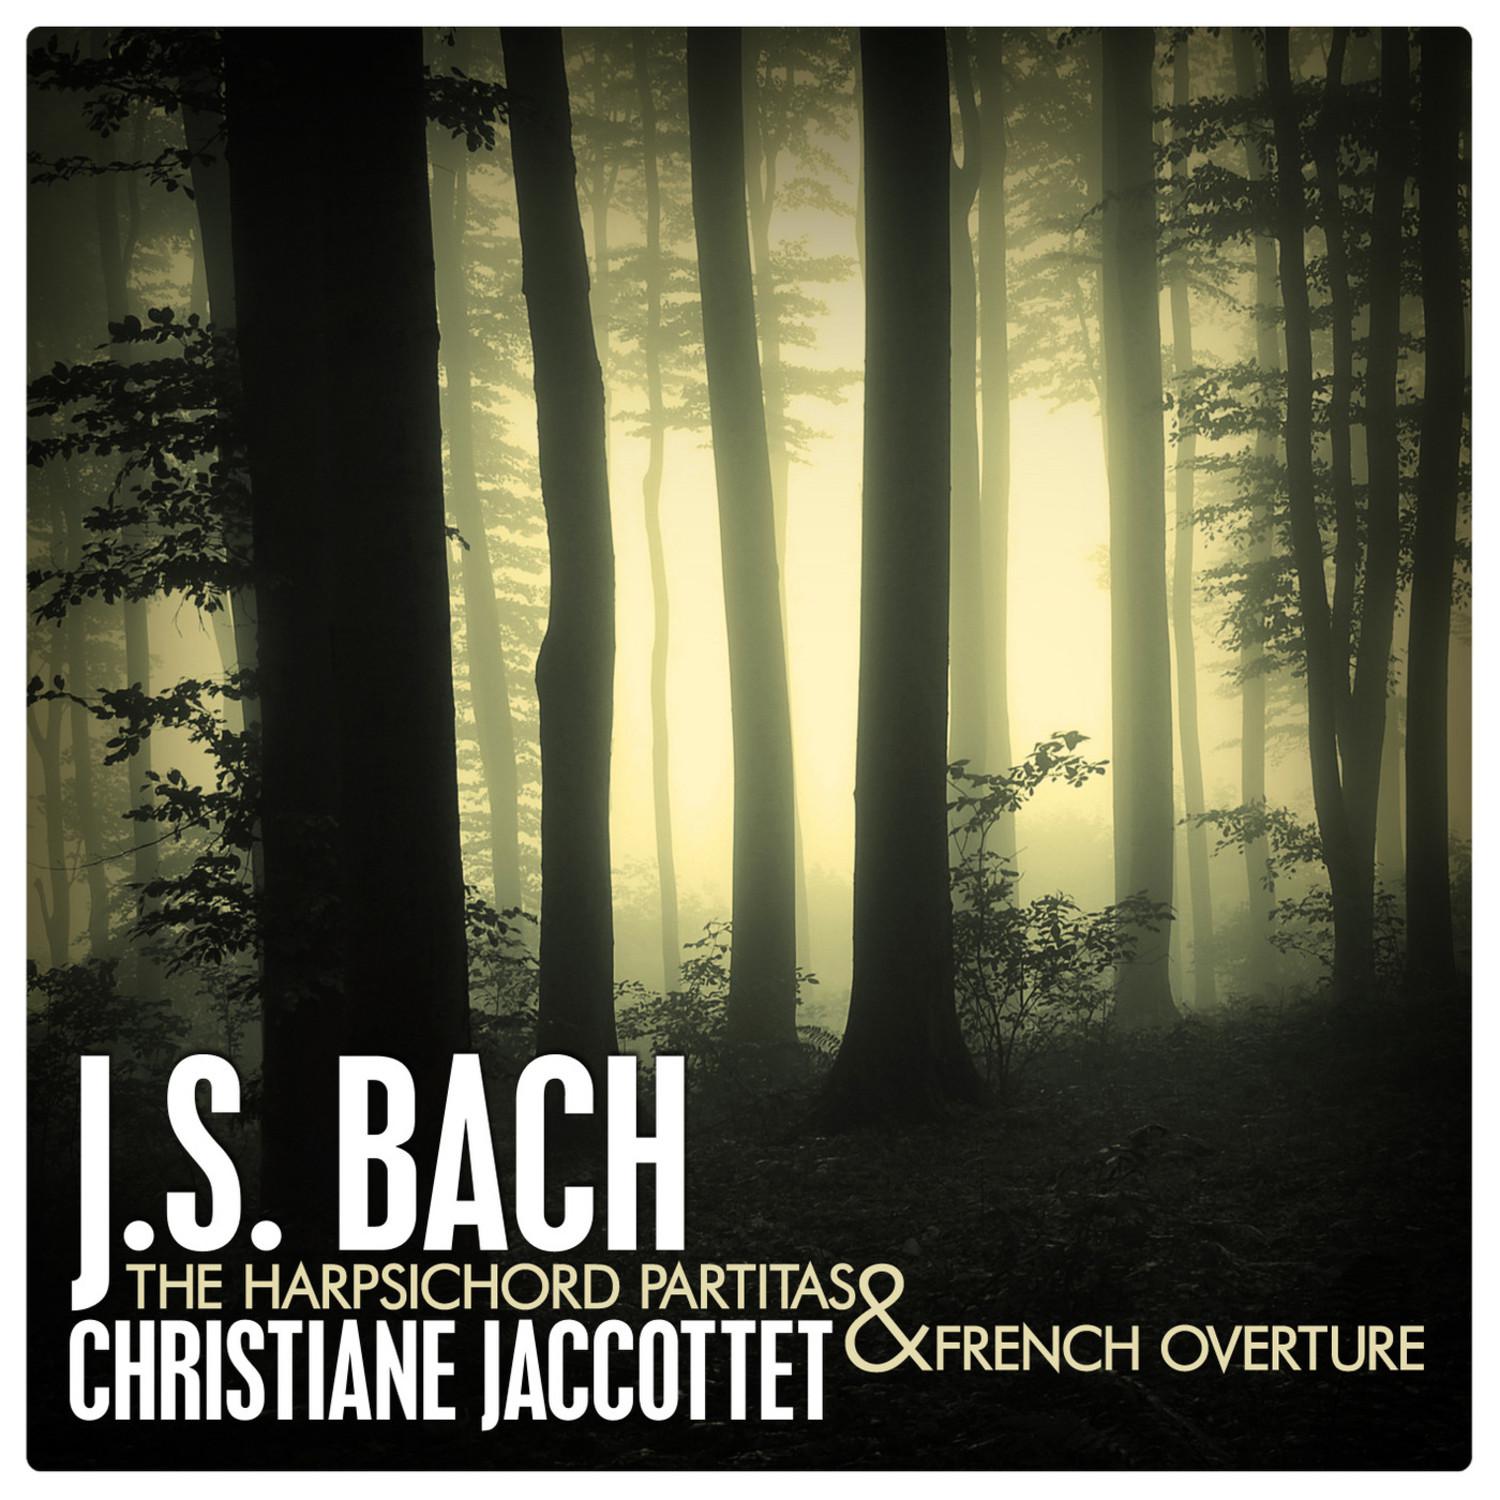 J.S. Bach: The Harpsichord Partitas and French Overture